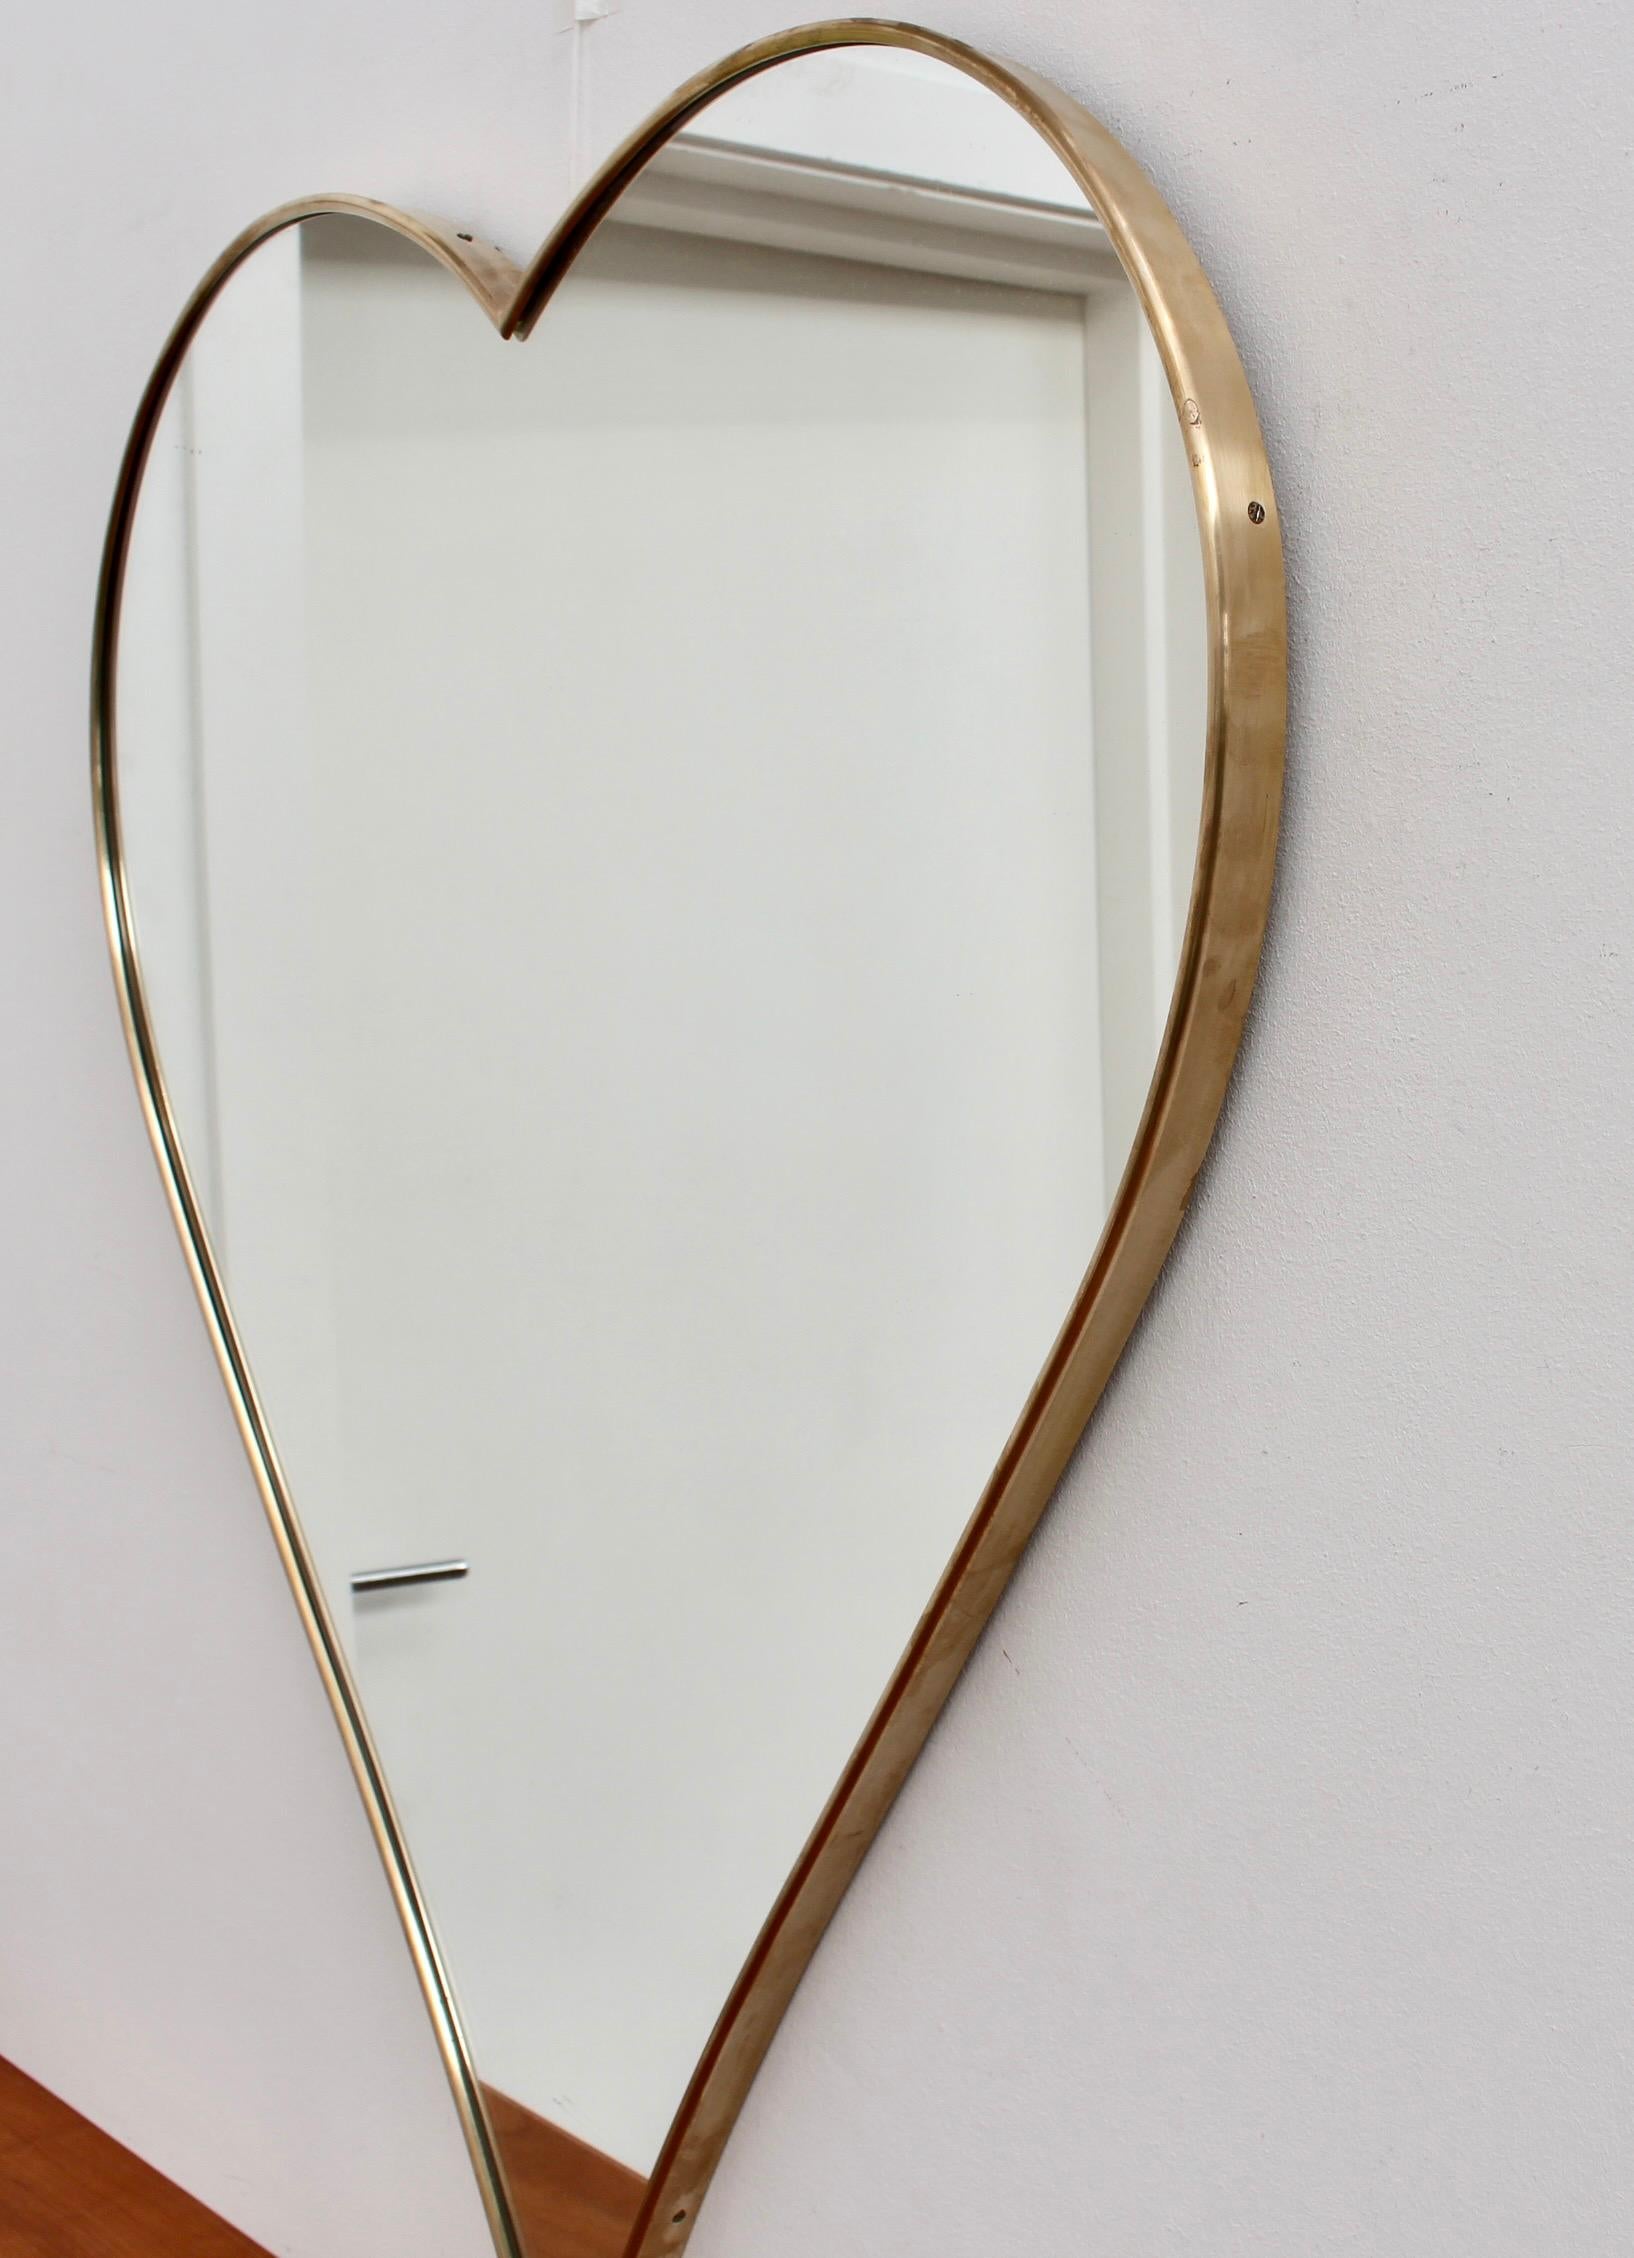 Pair of Vintage Italian Heart-Shaped Wall Mirrors with Brass Frames, c. 1960s 3